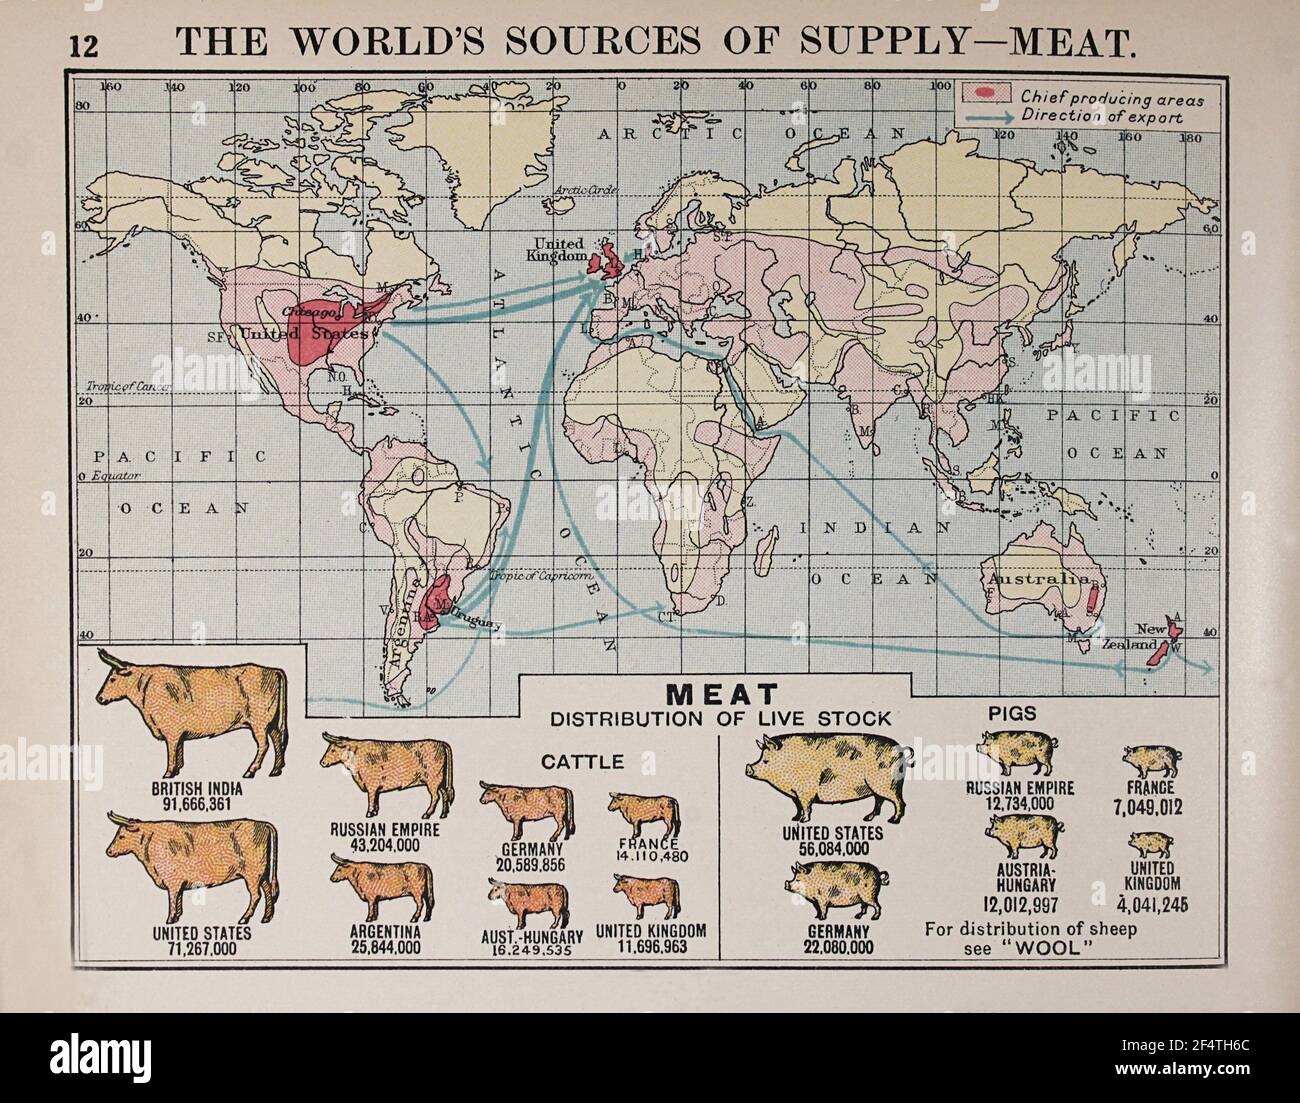 World map from 'Philips' Chamber of Commerce Atlas', 1912, showing meat production. Stock Photo